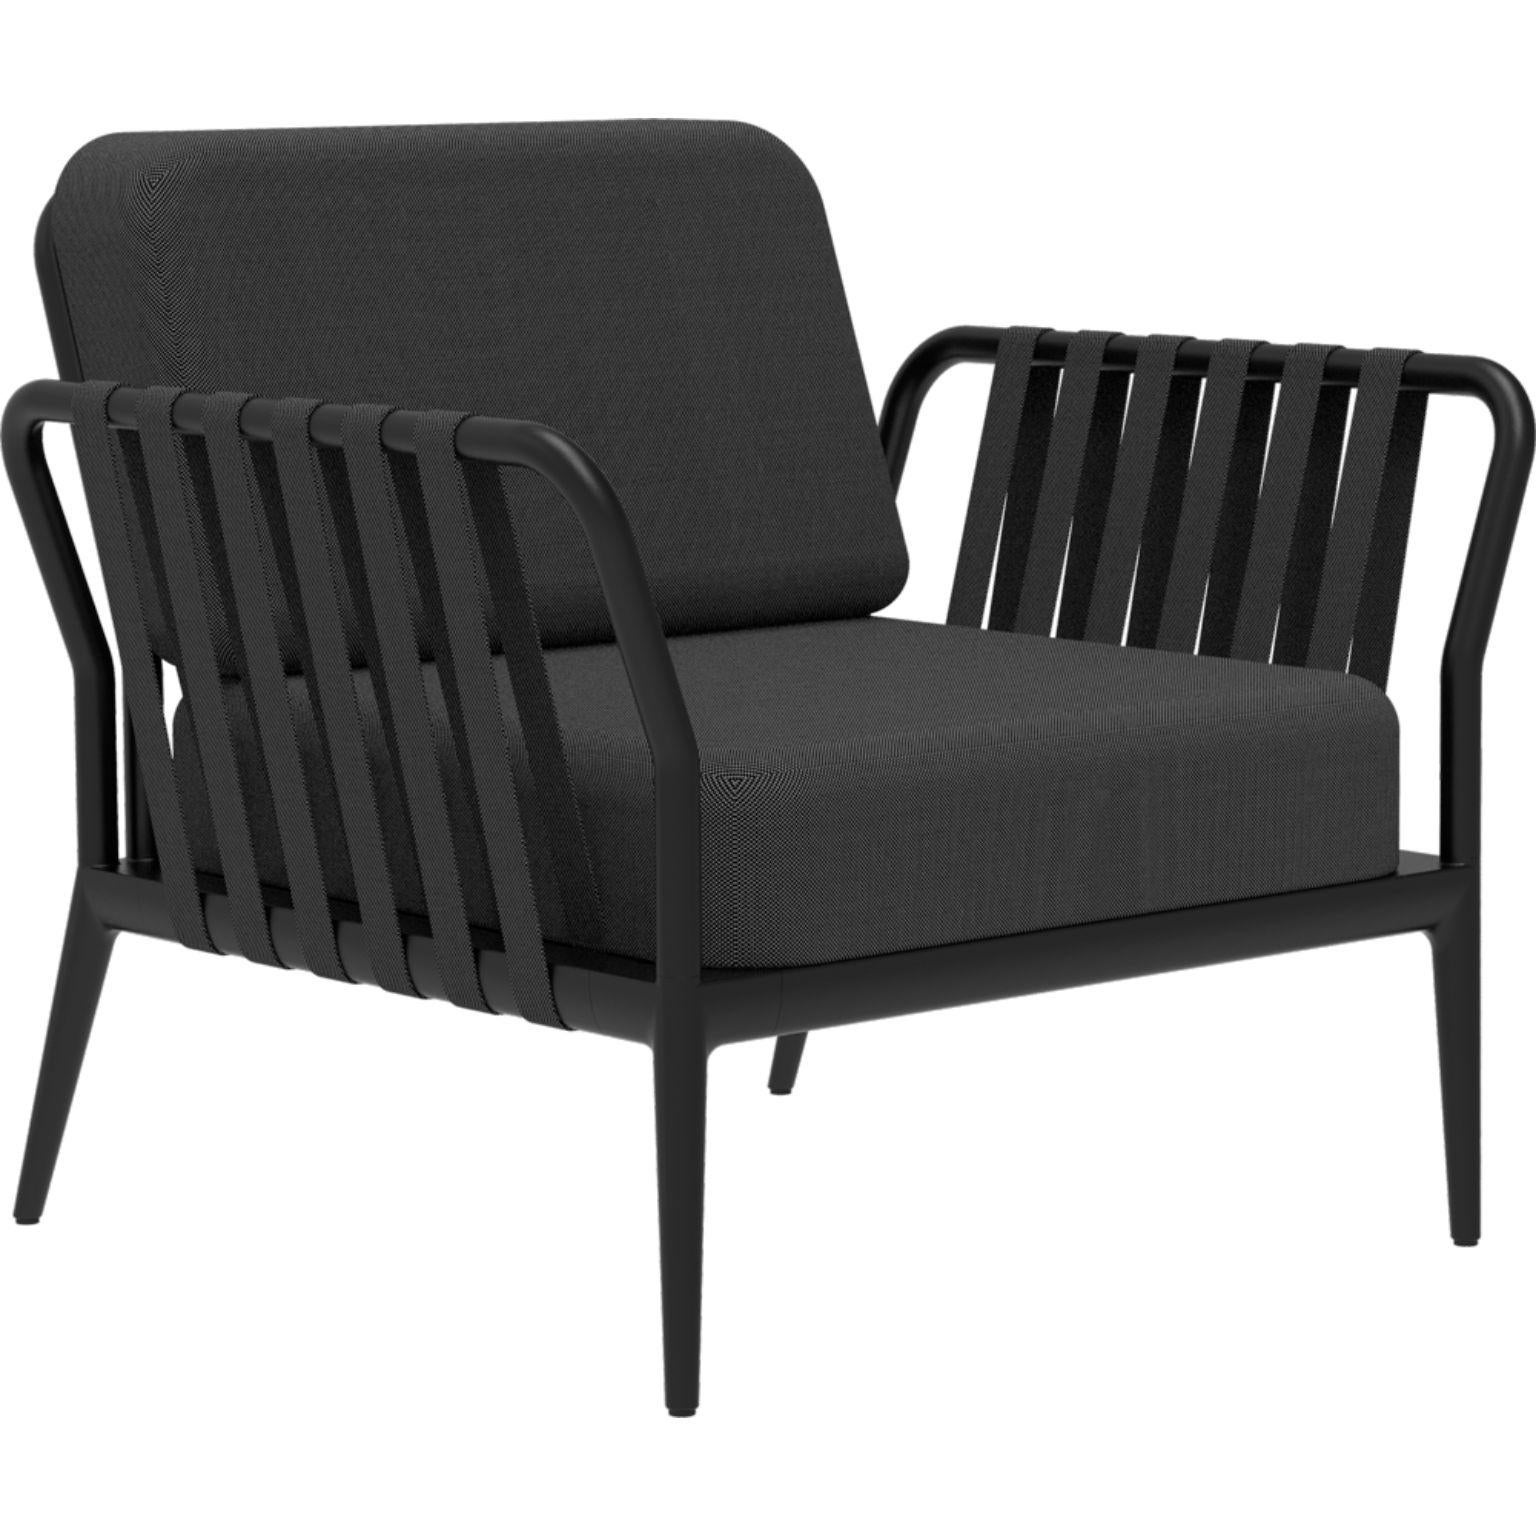 Ribbons black armchair by Mowee.
Dimensions: D83 x W91 x H81 cm (Seat Height 42 cm).
Material: Aluminium, upholstery
Weight: 20 kg
Also Available in different colours and finishes.

An unmistakable collection for its beauty and robustness. A